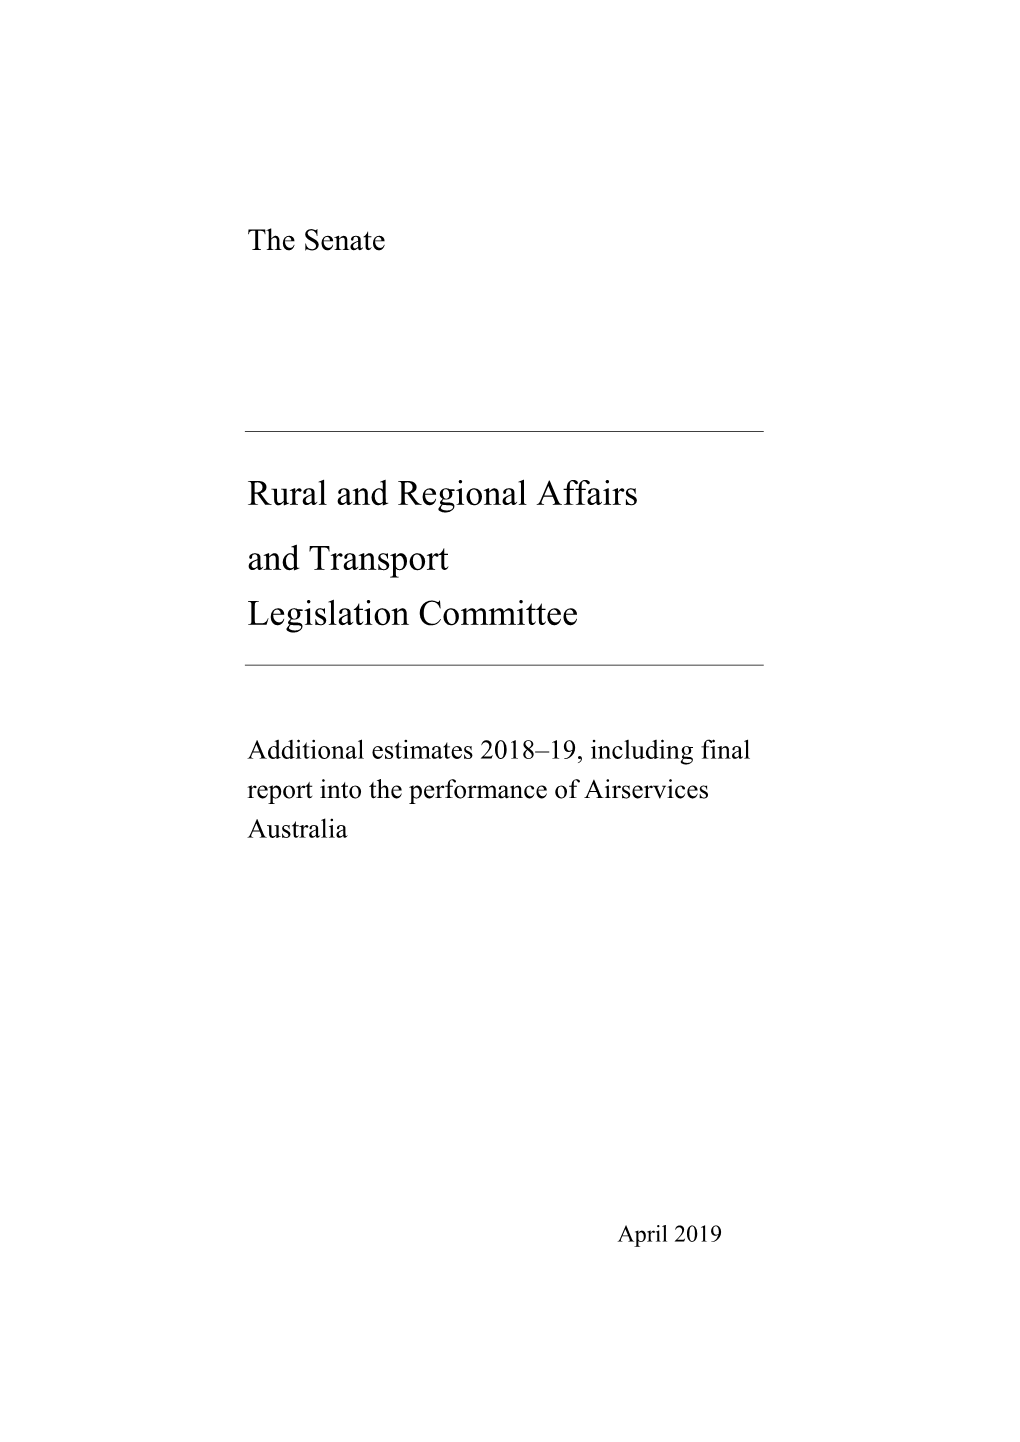 Additional Estimates 2018–19, Including Final Report Into the Performance of Airservices Australia